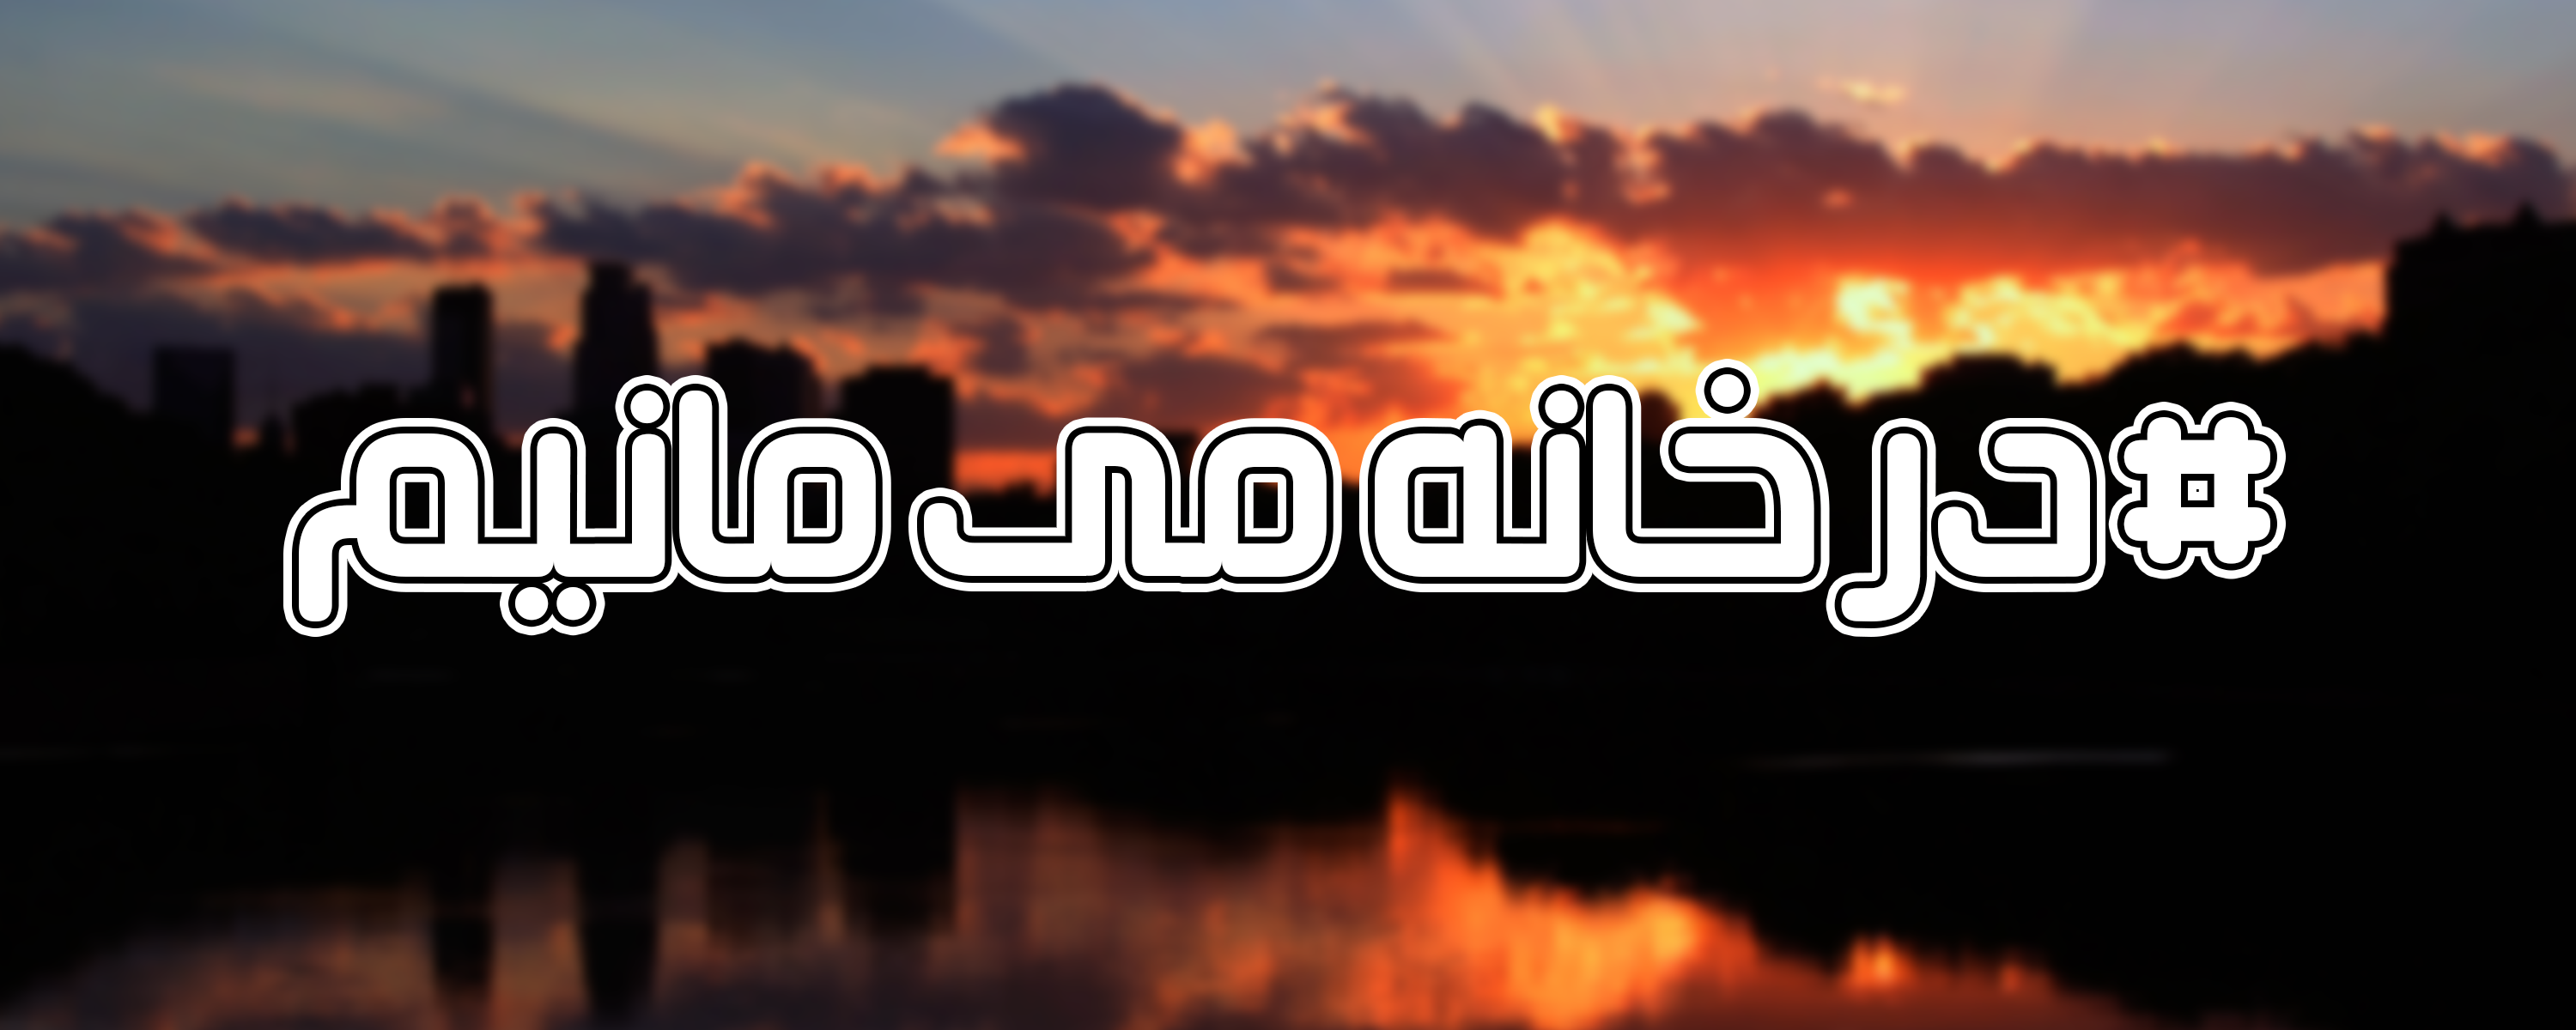 fd11_امام.png